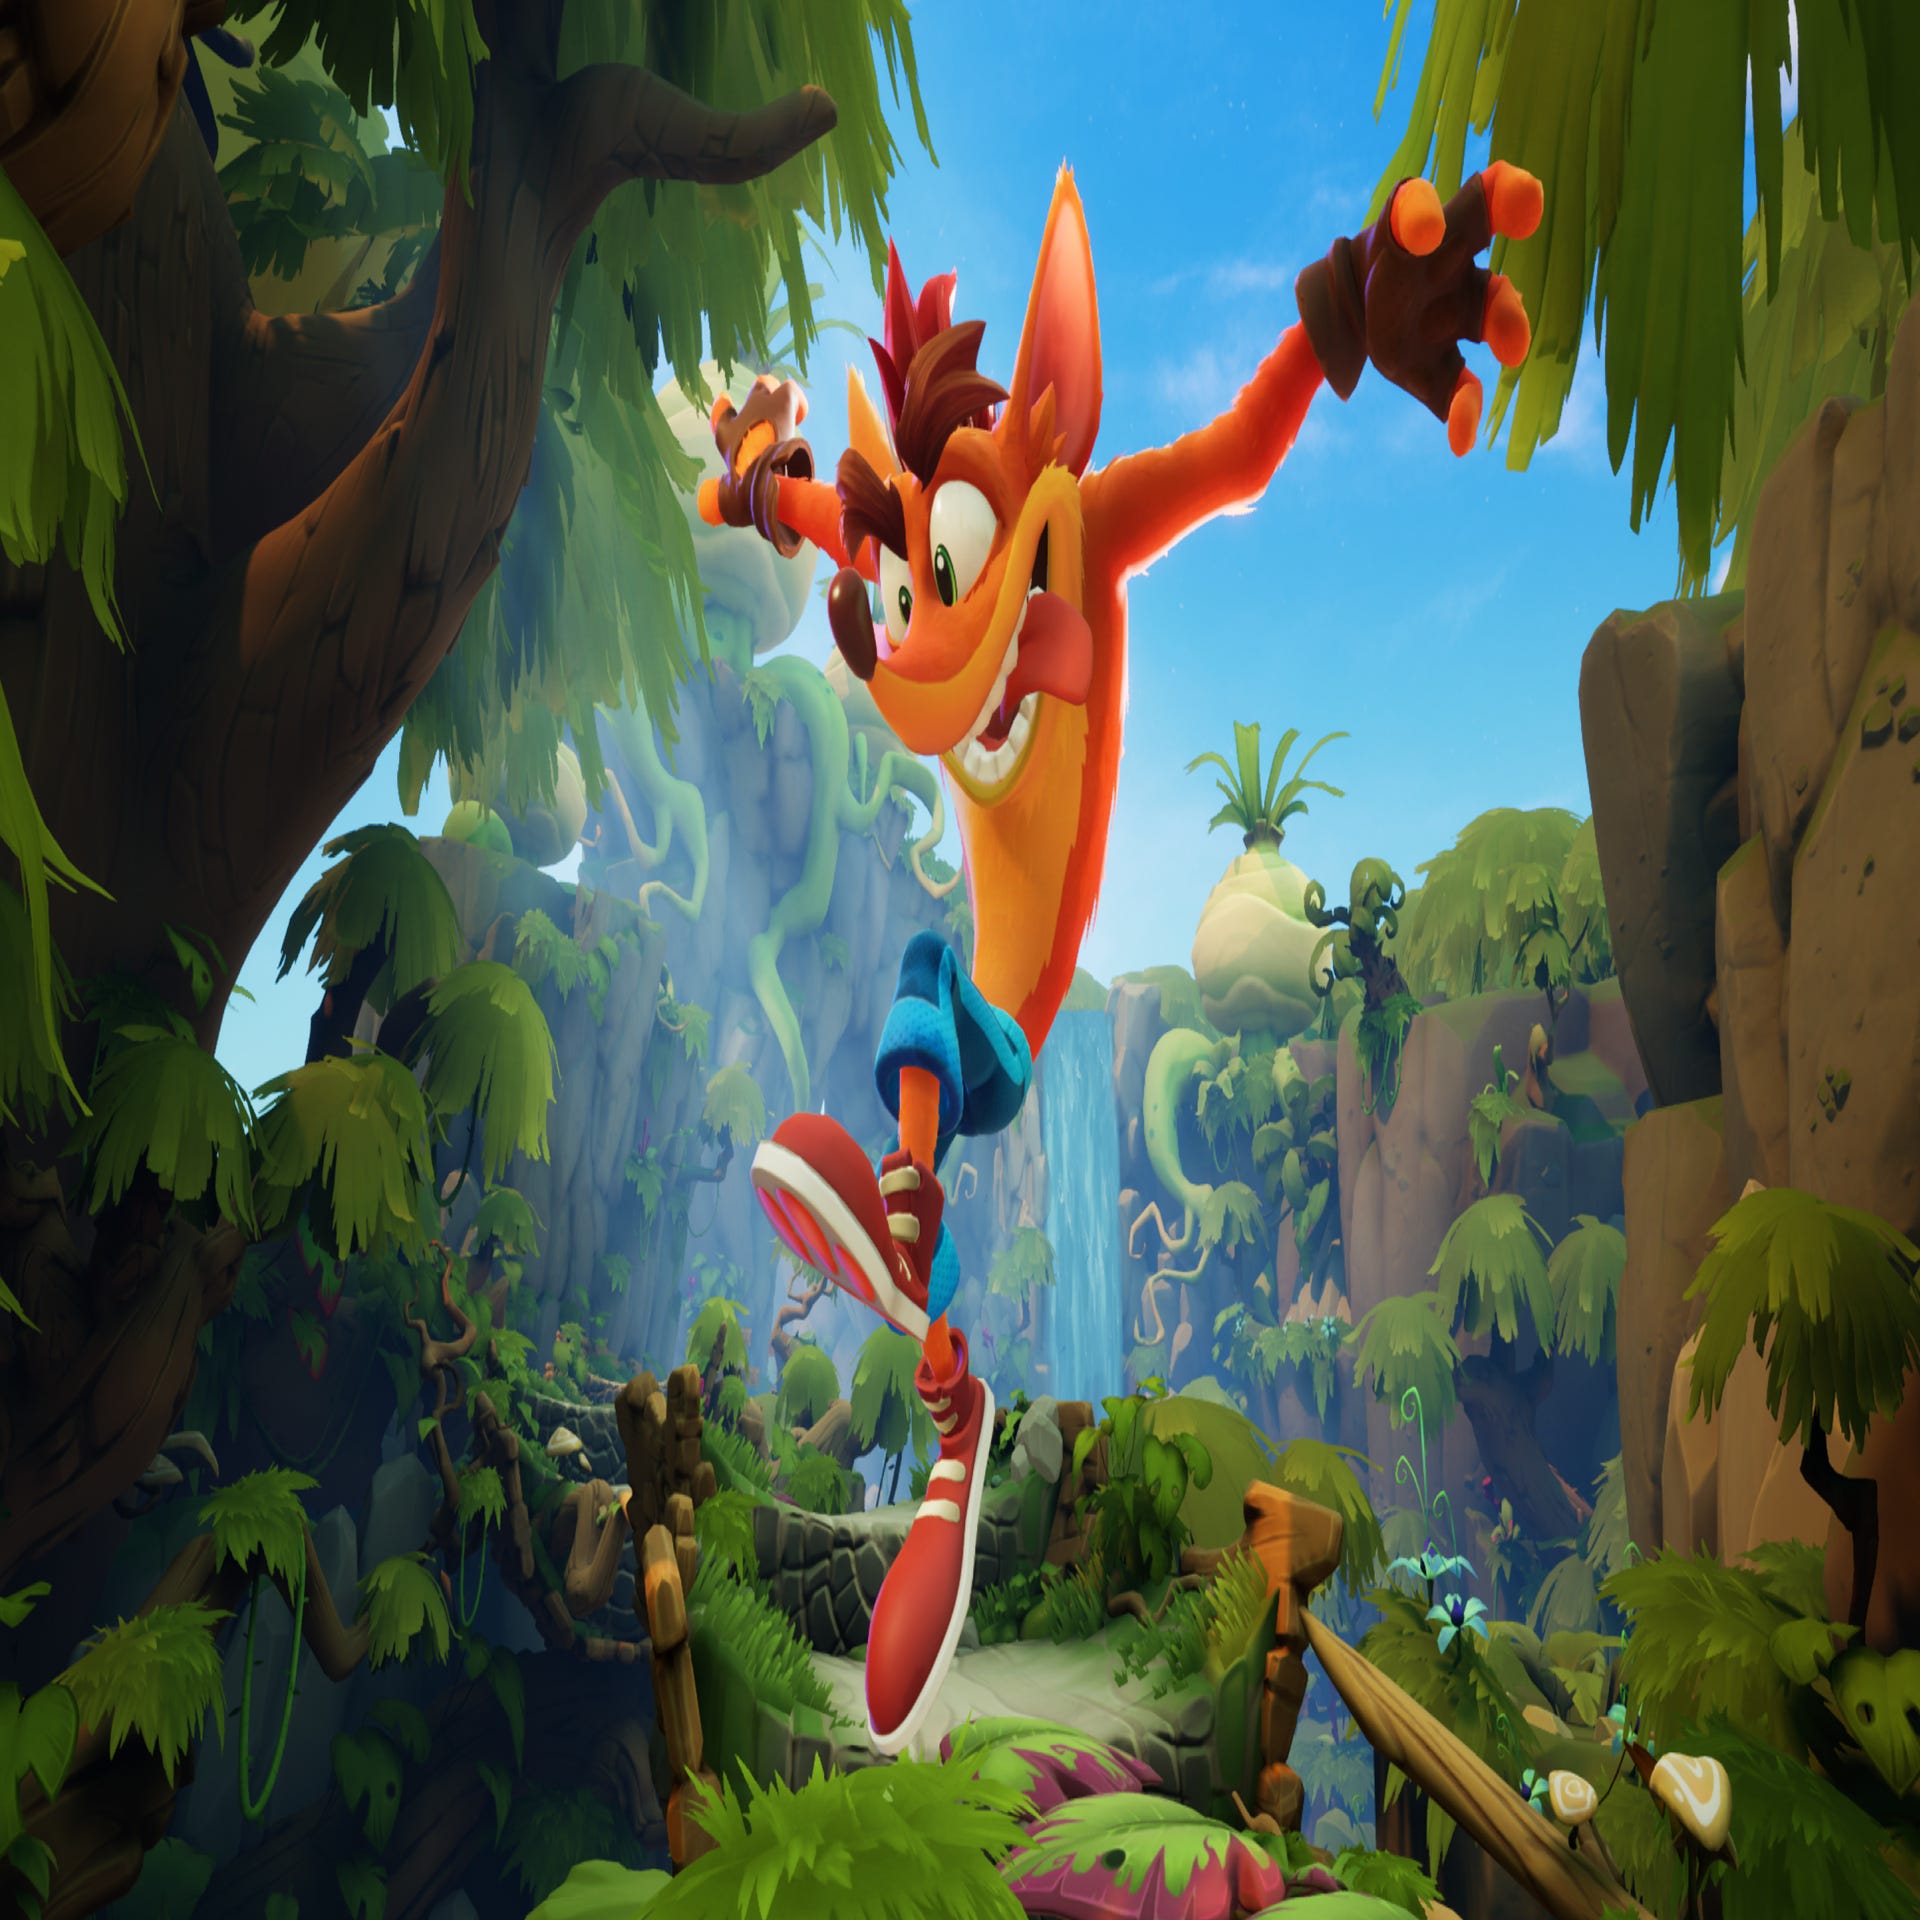 crash-bandicoot-4-its-about-time-ps5-km-2841584866.jpeg?width=1920&height=1920&fit=bounds&quality=80&format=jpg&auto=webp